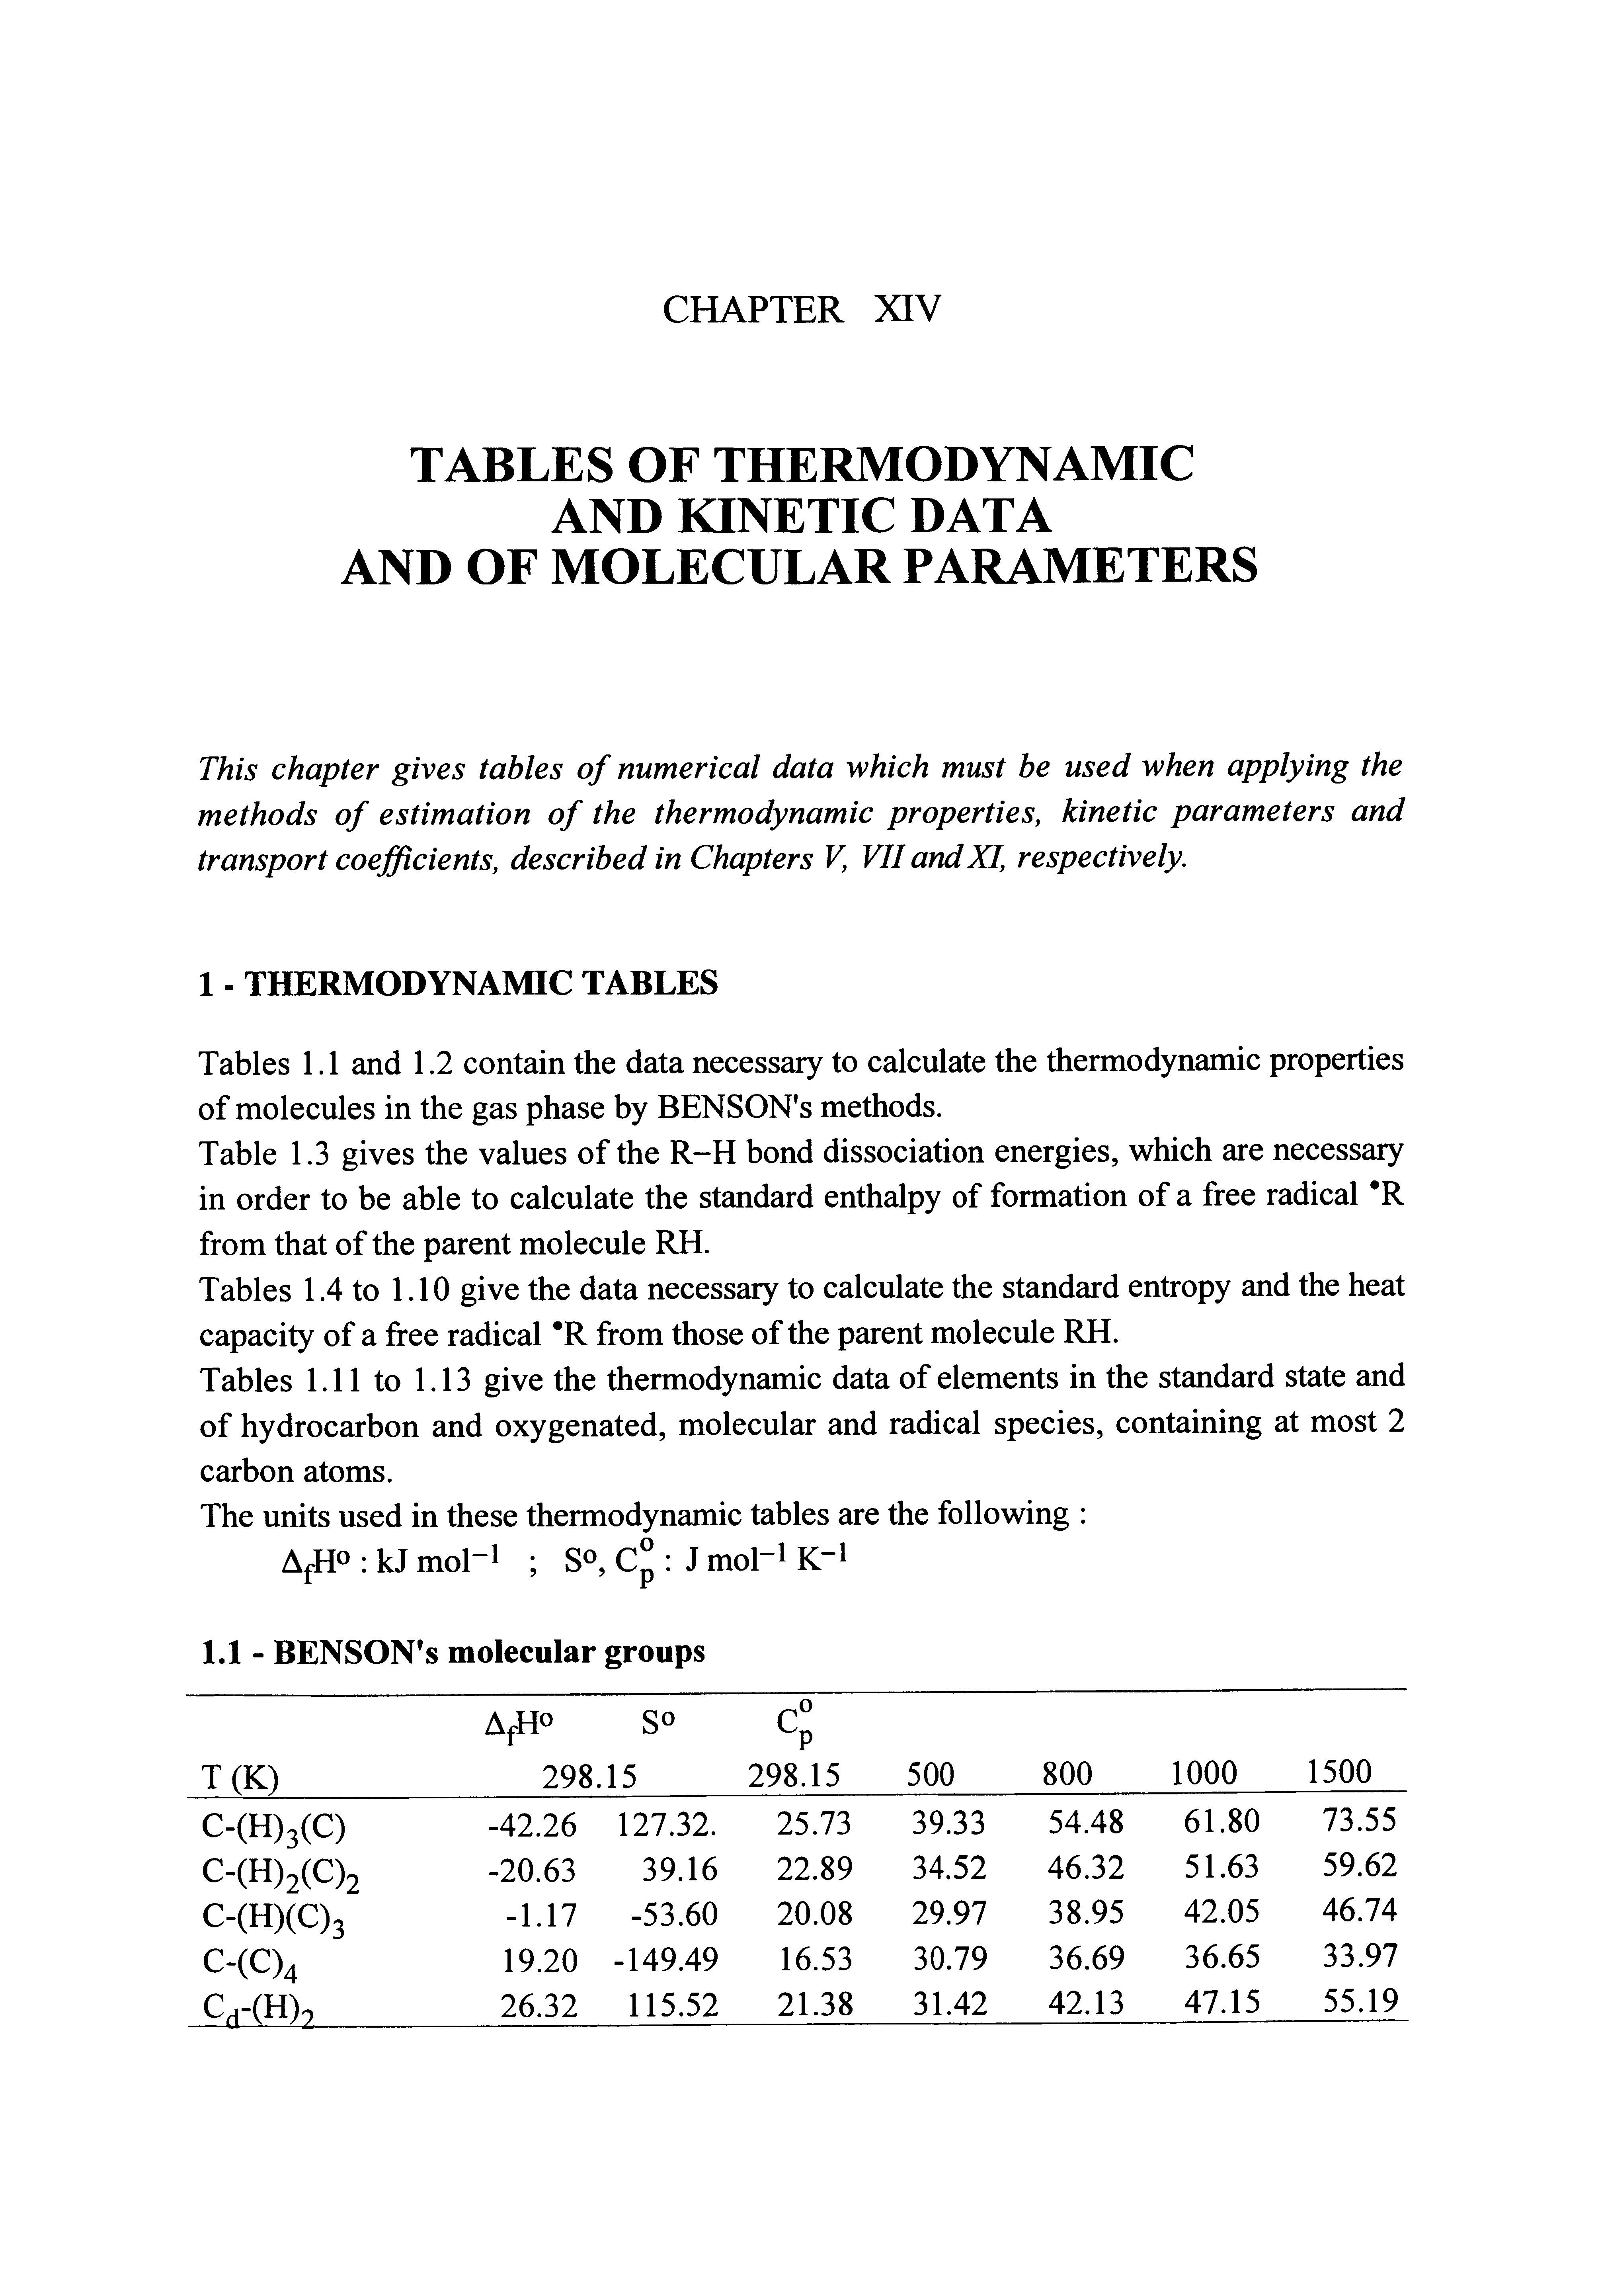 Tables 1.1 and 1.2 contain the data necessary to calculate the thermodynamic properties of molecules in the gas phase by BENSON s methods.